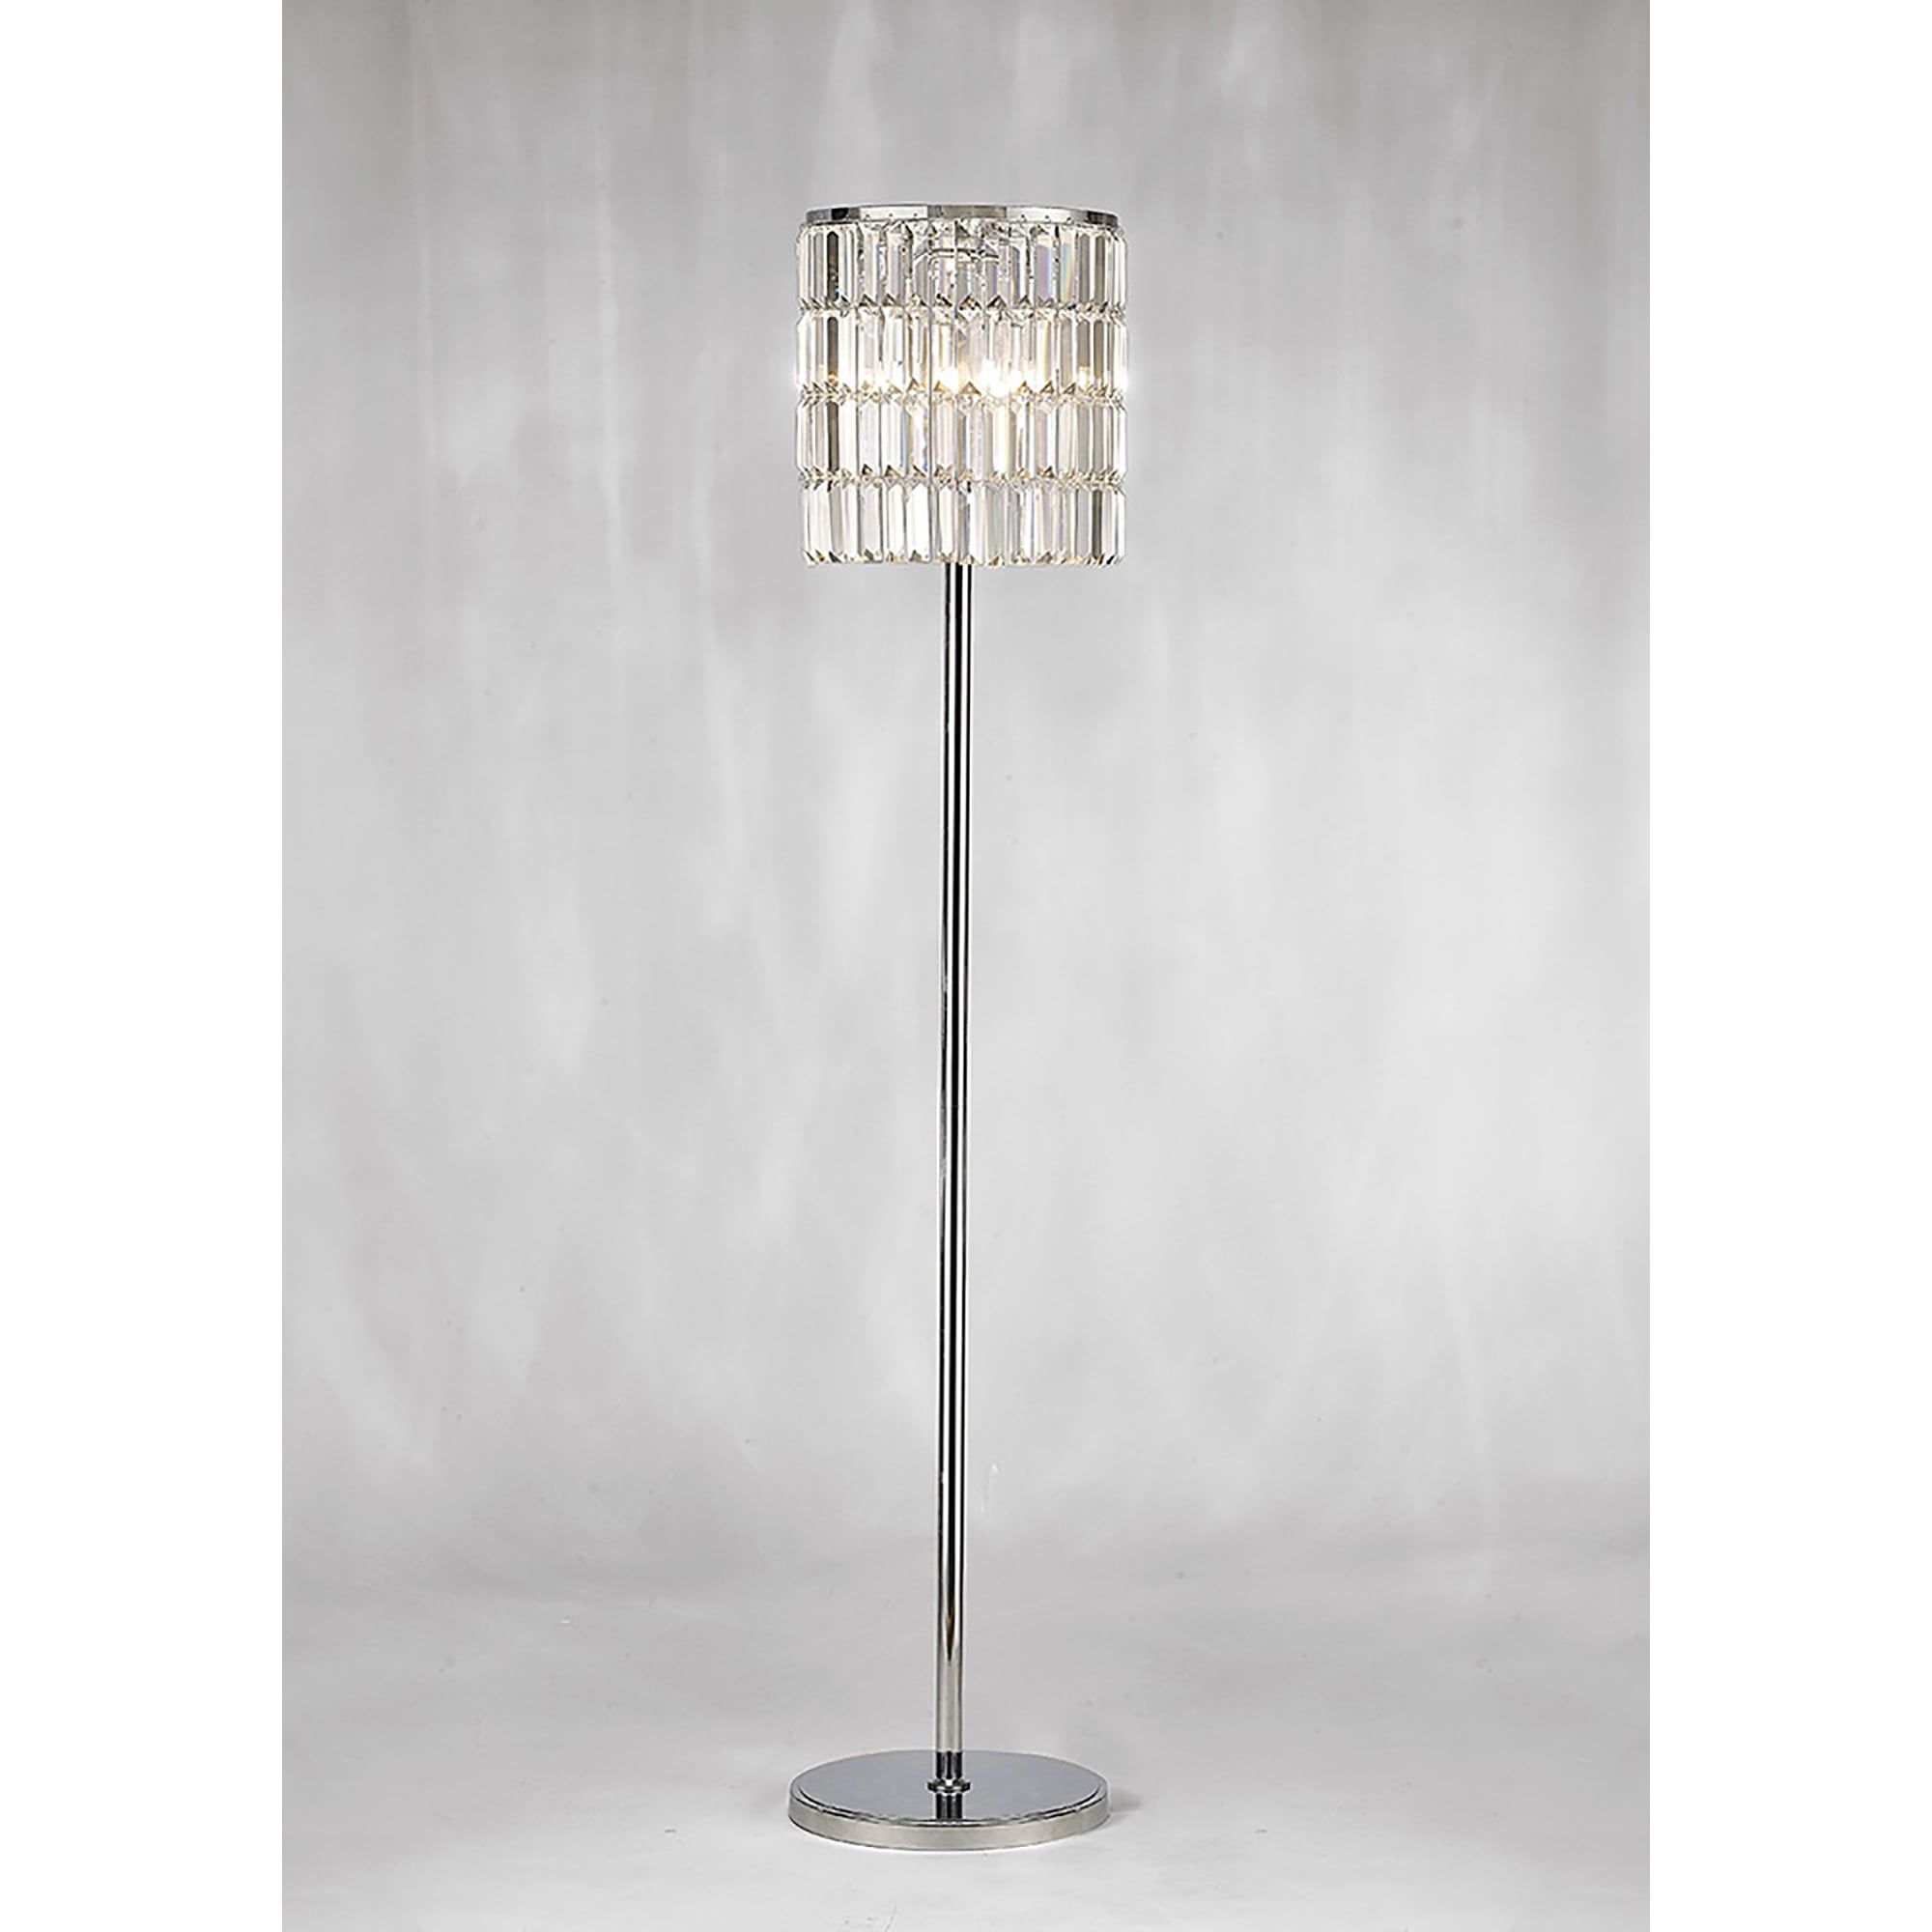 Diyas Il30179 Torre 5 Light Floor Lamp With Polished Chrome Finish And  Crystal Rods N18035 – Indoor Lighting From Castlegate Lights Uk With Chrome Crystal Tower Floor Lamps (View 16 of 20)